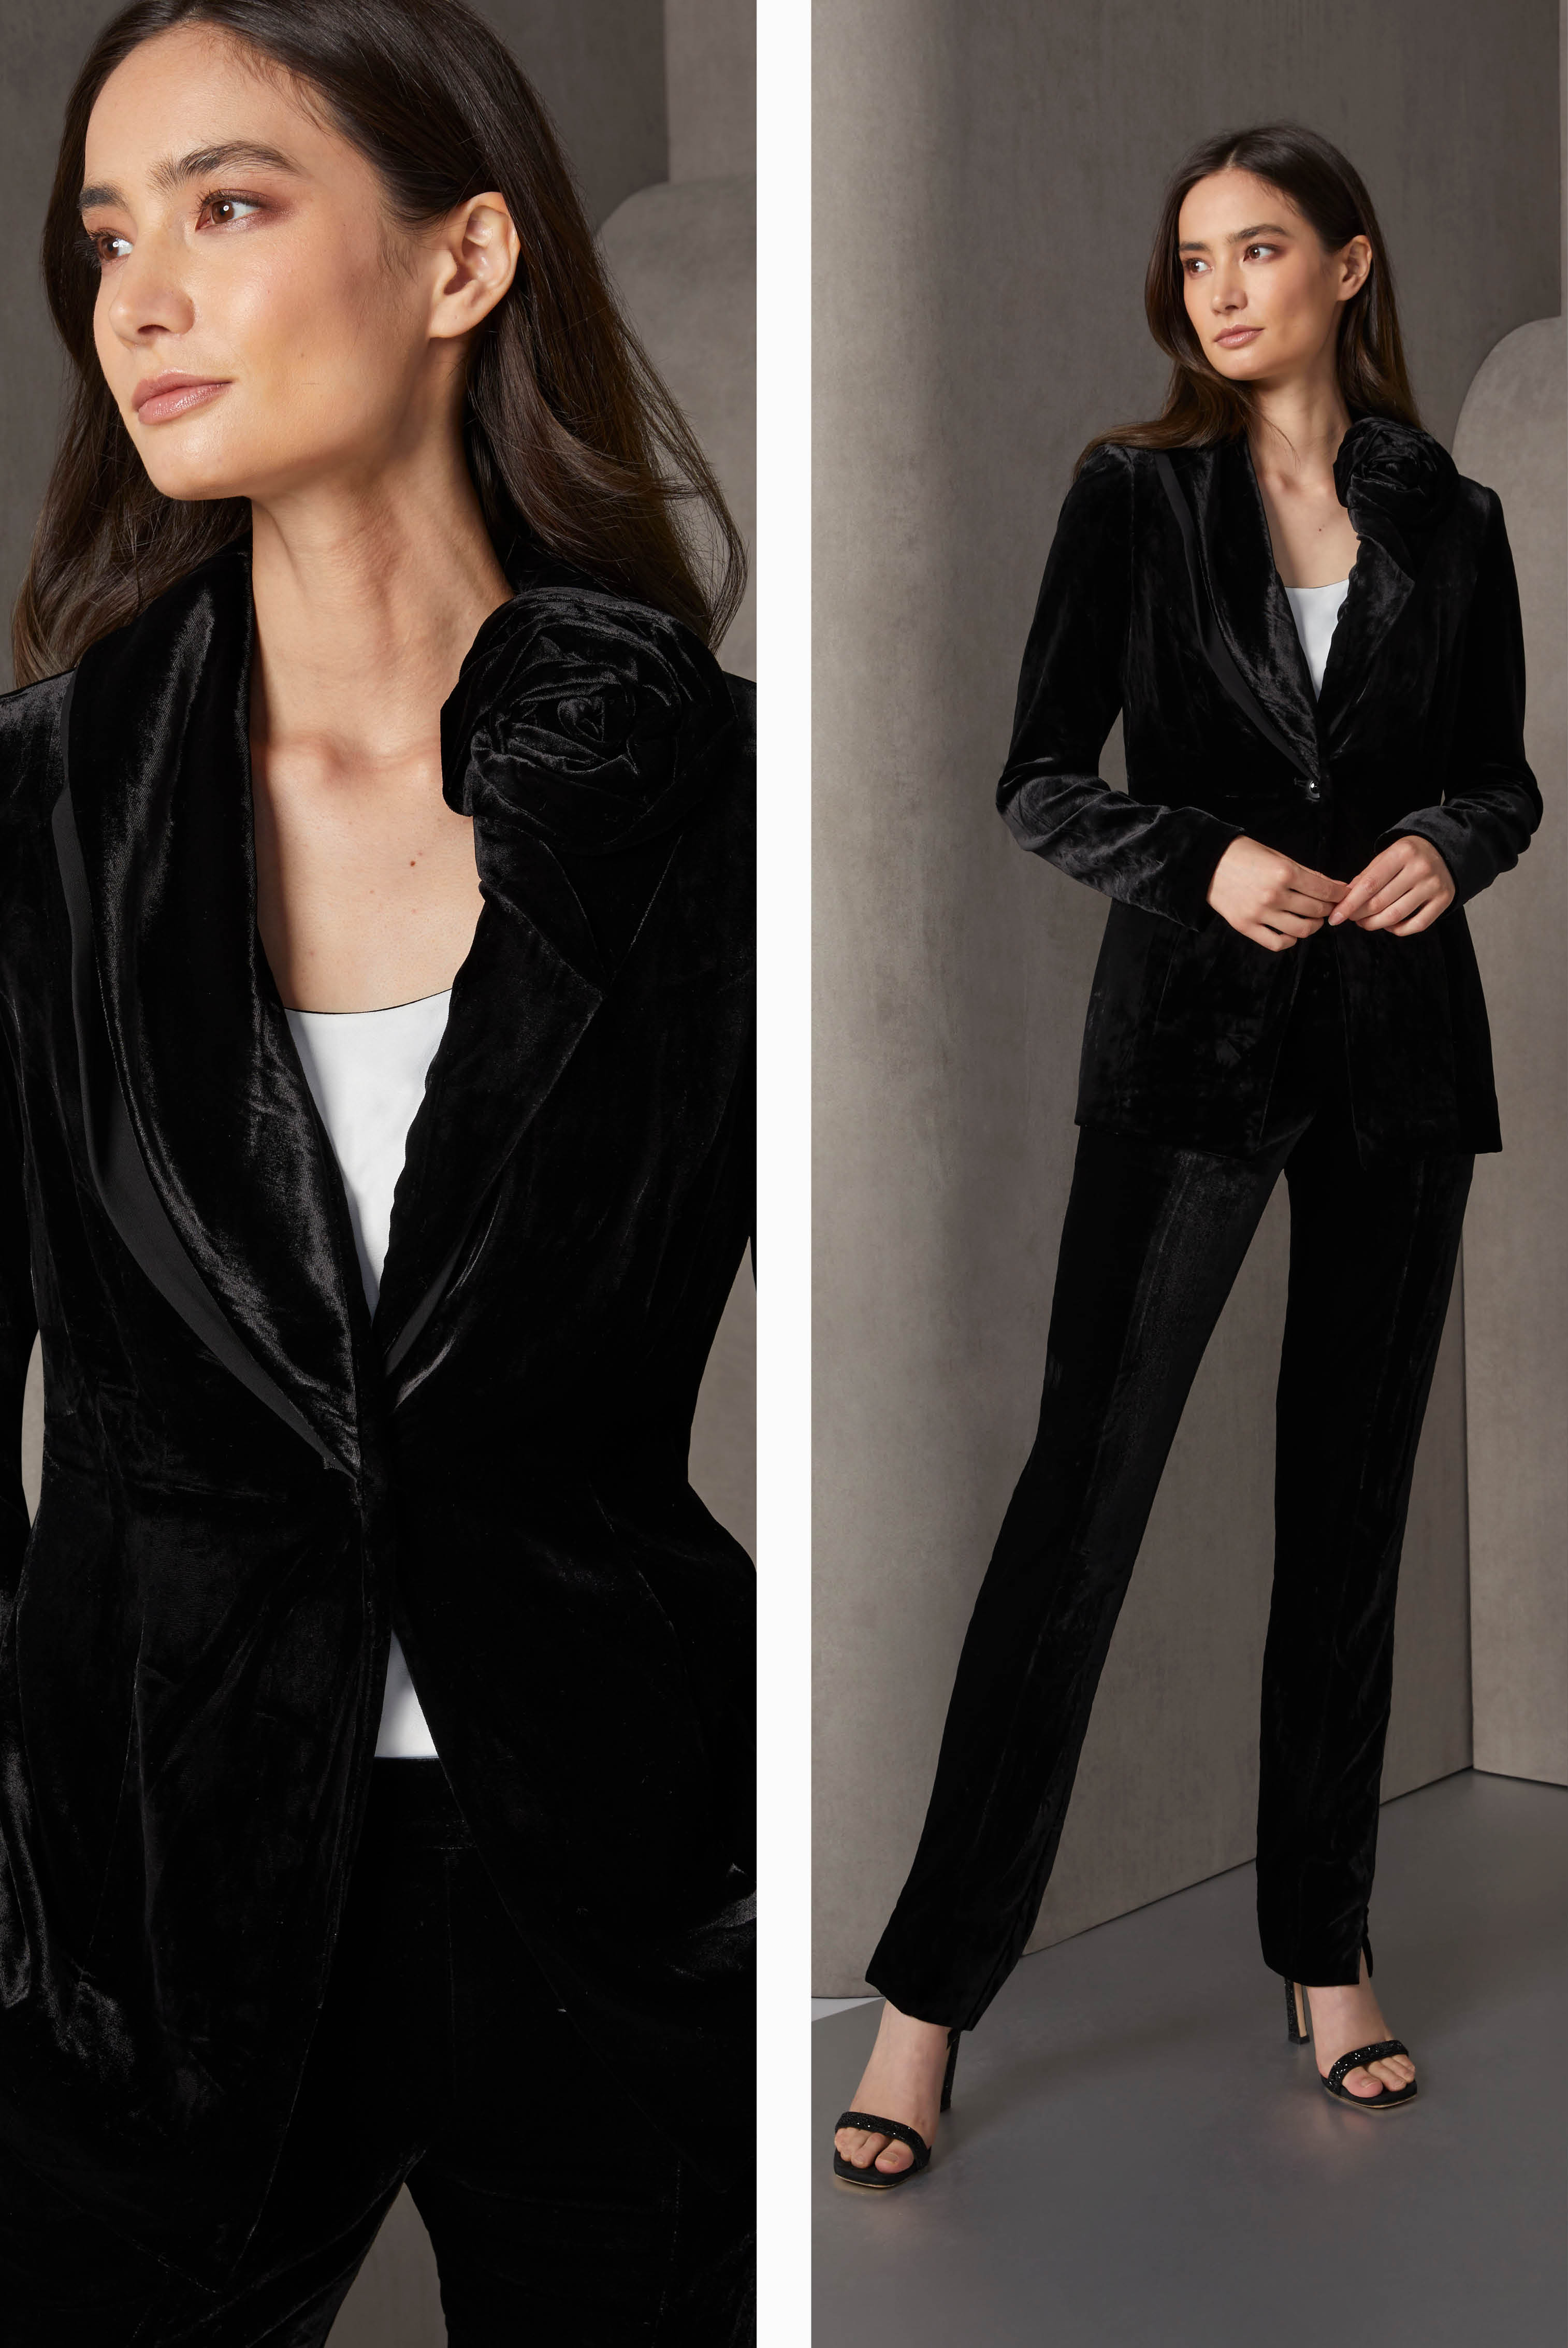 Silk-softened black stretch velvet crafts a holiday suit worth celebrating. The blazer has a self rose sculpted into the left shawl collar. The lapel design is underscored with an under-collar of stretch crêpe.